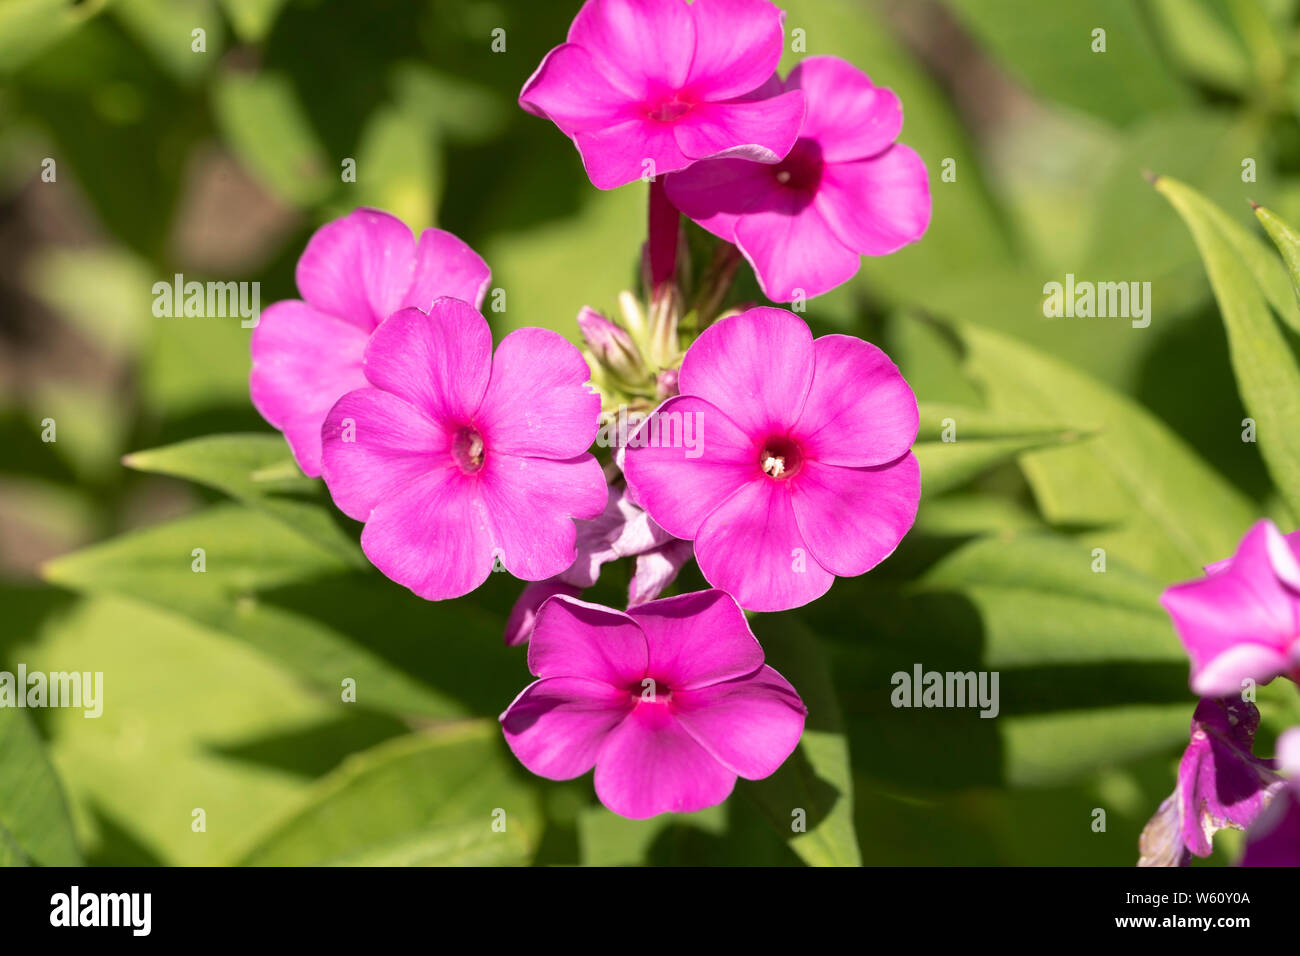 Magenta coloured flowers of Phlox paniculata Younique Cerise (also known as Garden Phlox) in Lower Austria Stock Photo